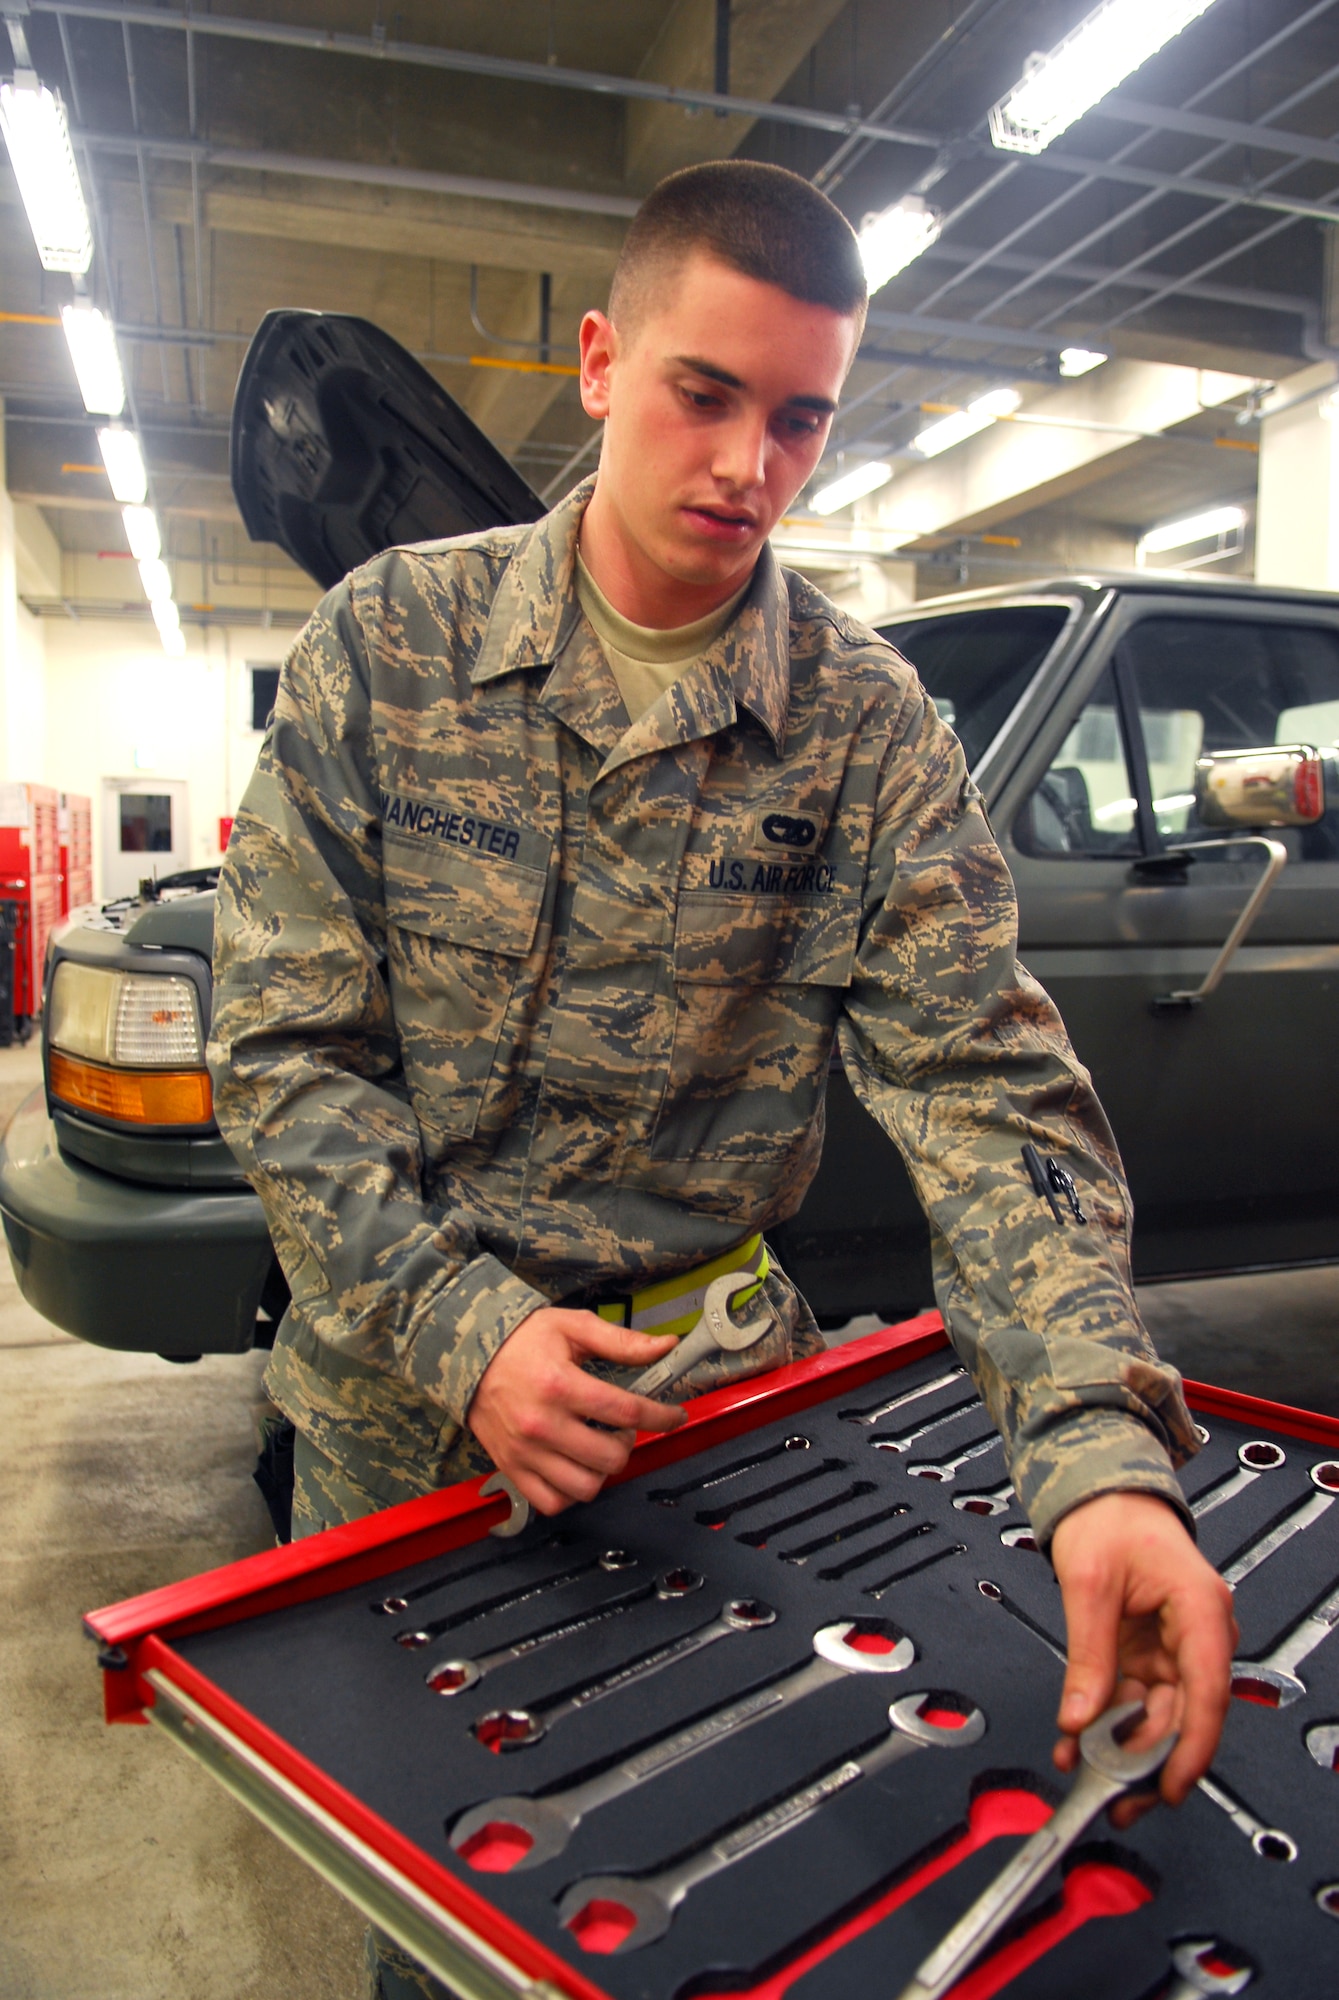 Airman 1st Class Derek Manchester, 18th Logistics Readiness Squadron, puts tools away after performing maintenance on a vehicle during the 2008 Pacific Air Forces Operational Readiness Inspection at Kadena Air Base, Japan, March 11, 2008. PACAF is conducting the inspection from March 9 to 15 to validate the mission readiness of the 18th Wing. (U.S. Air Force photo/Staff Sgt. Joshua J. Garcia) 